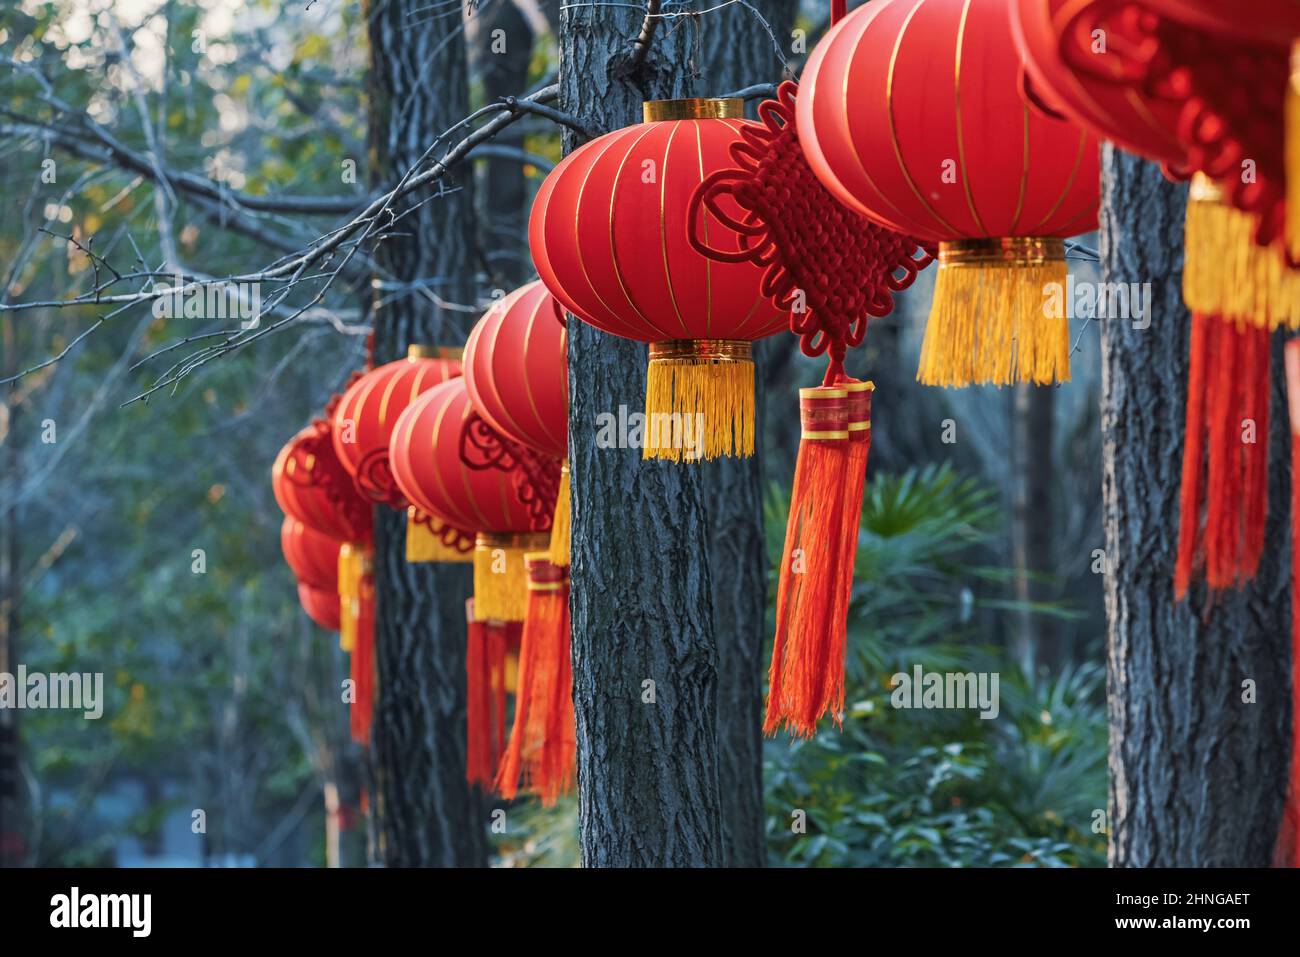 Red Chinese lanterns hanging on trees in a park Stock Photo